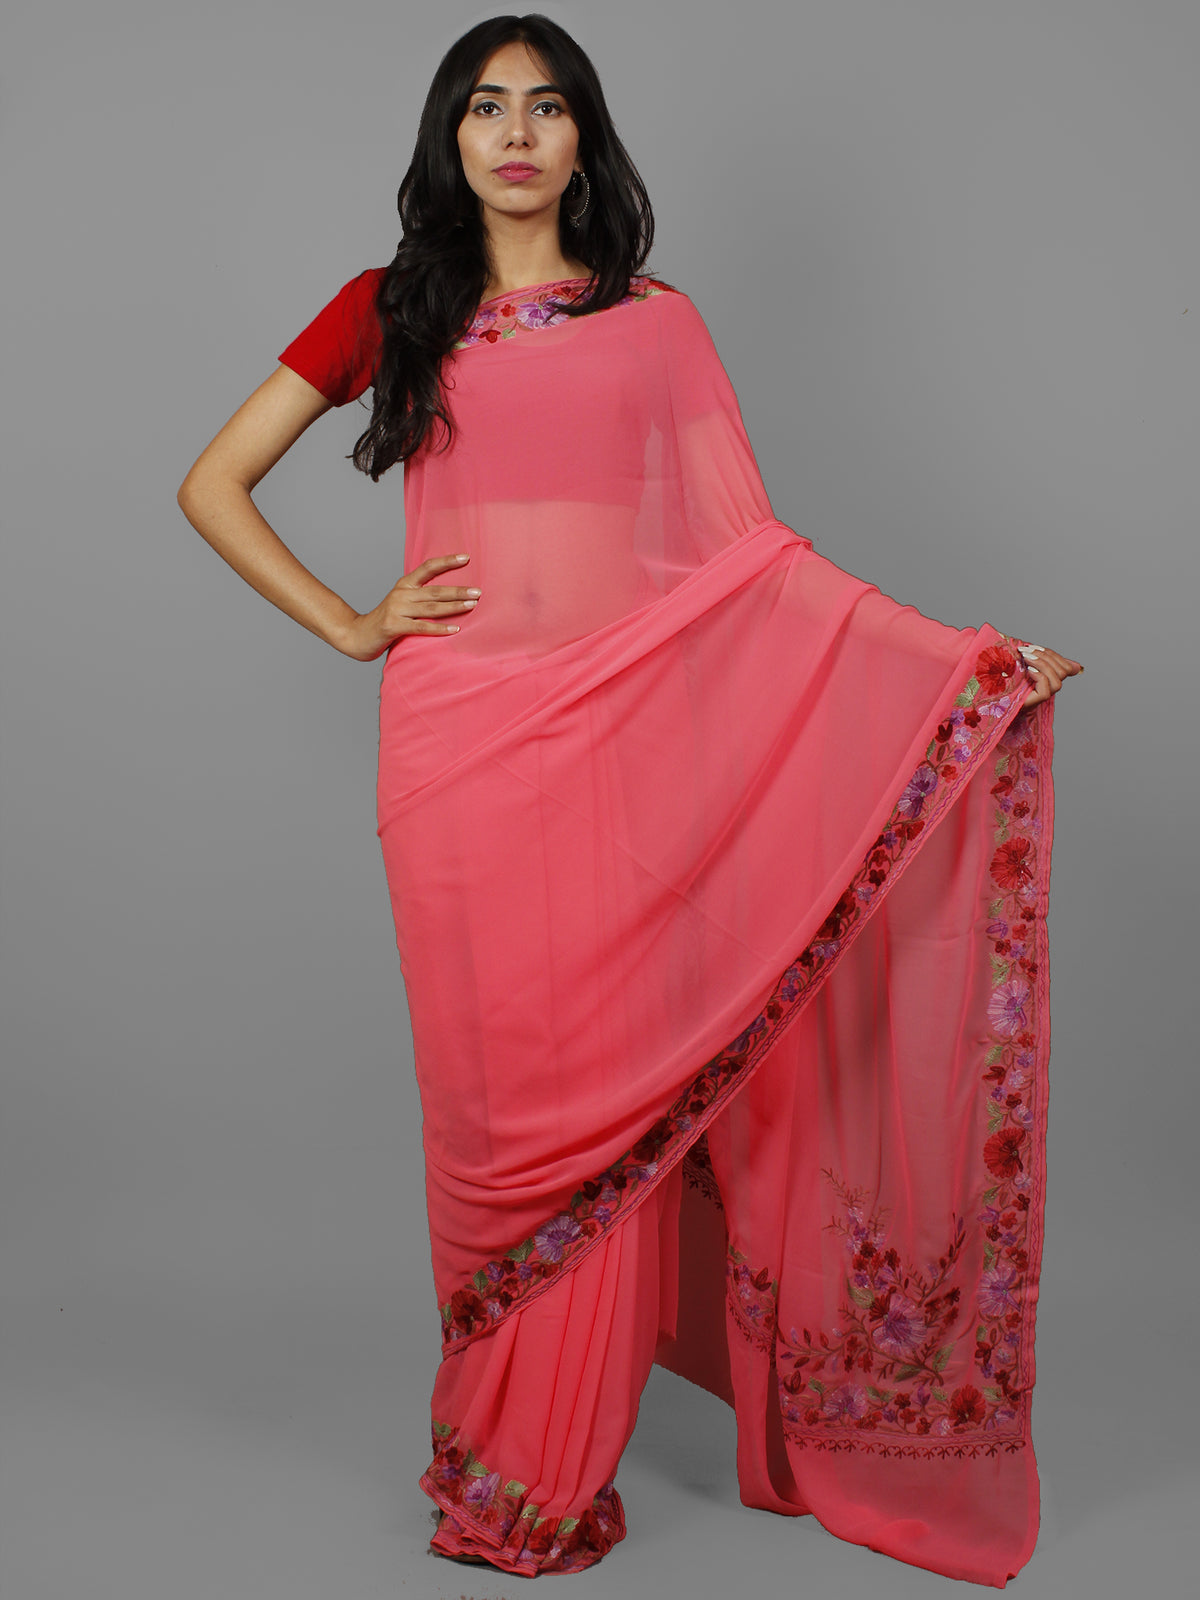 Pink Lavender Red Green Aari Embroidered Chiffon Saree From Kashmir  - S031702163